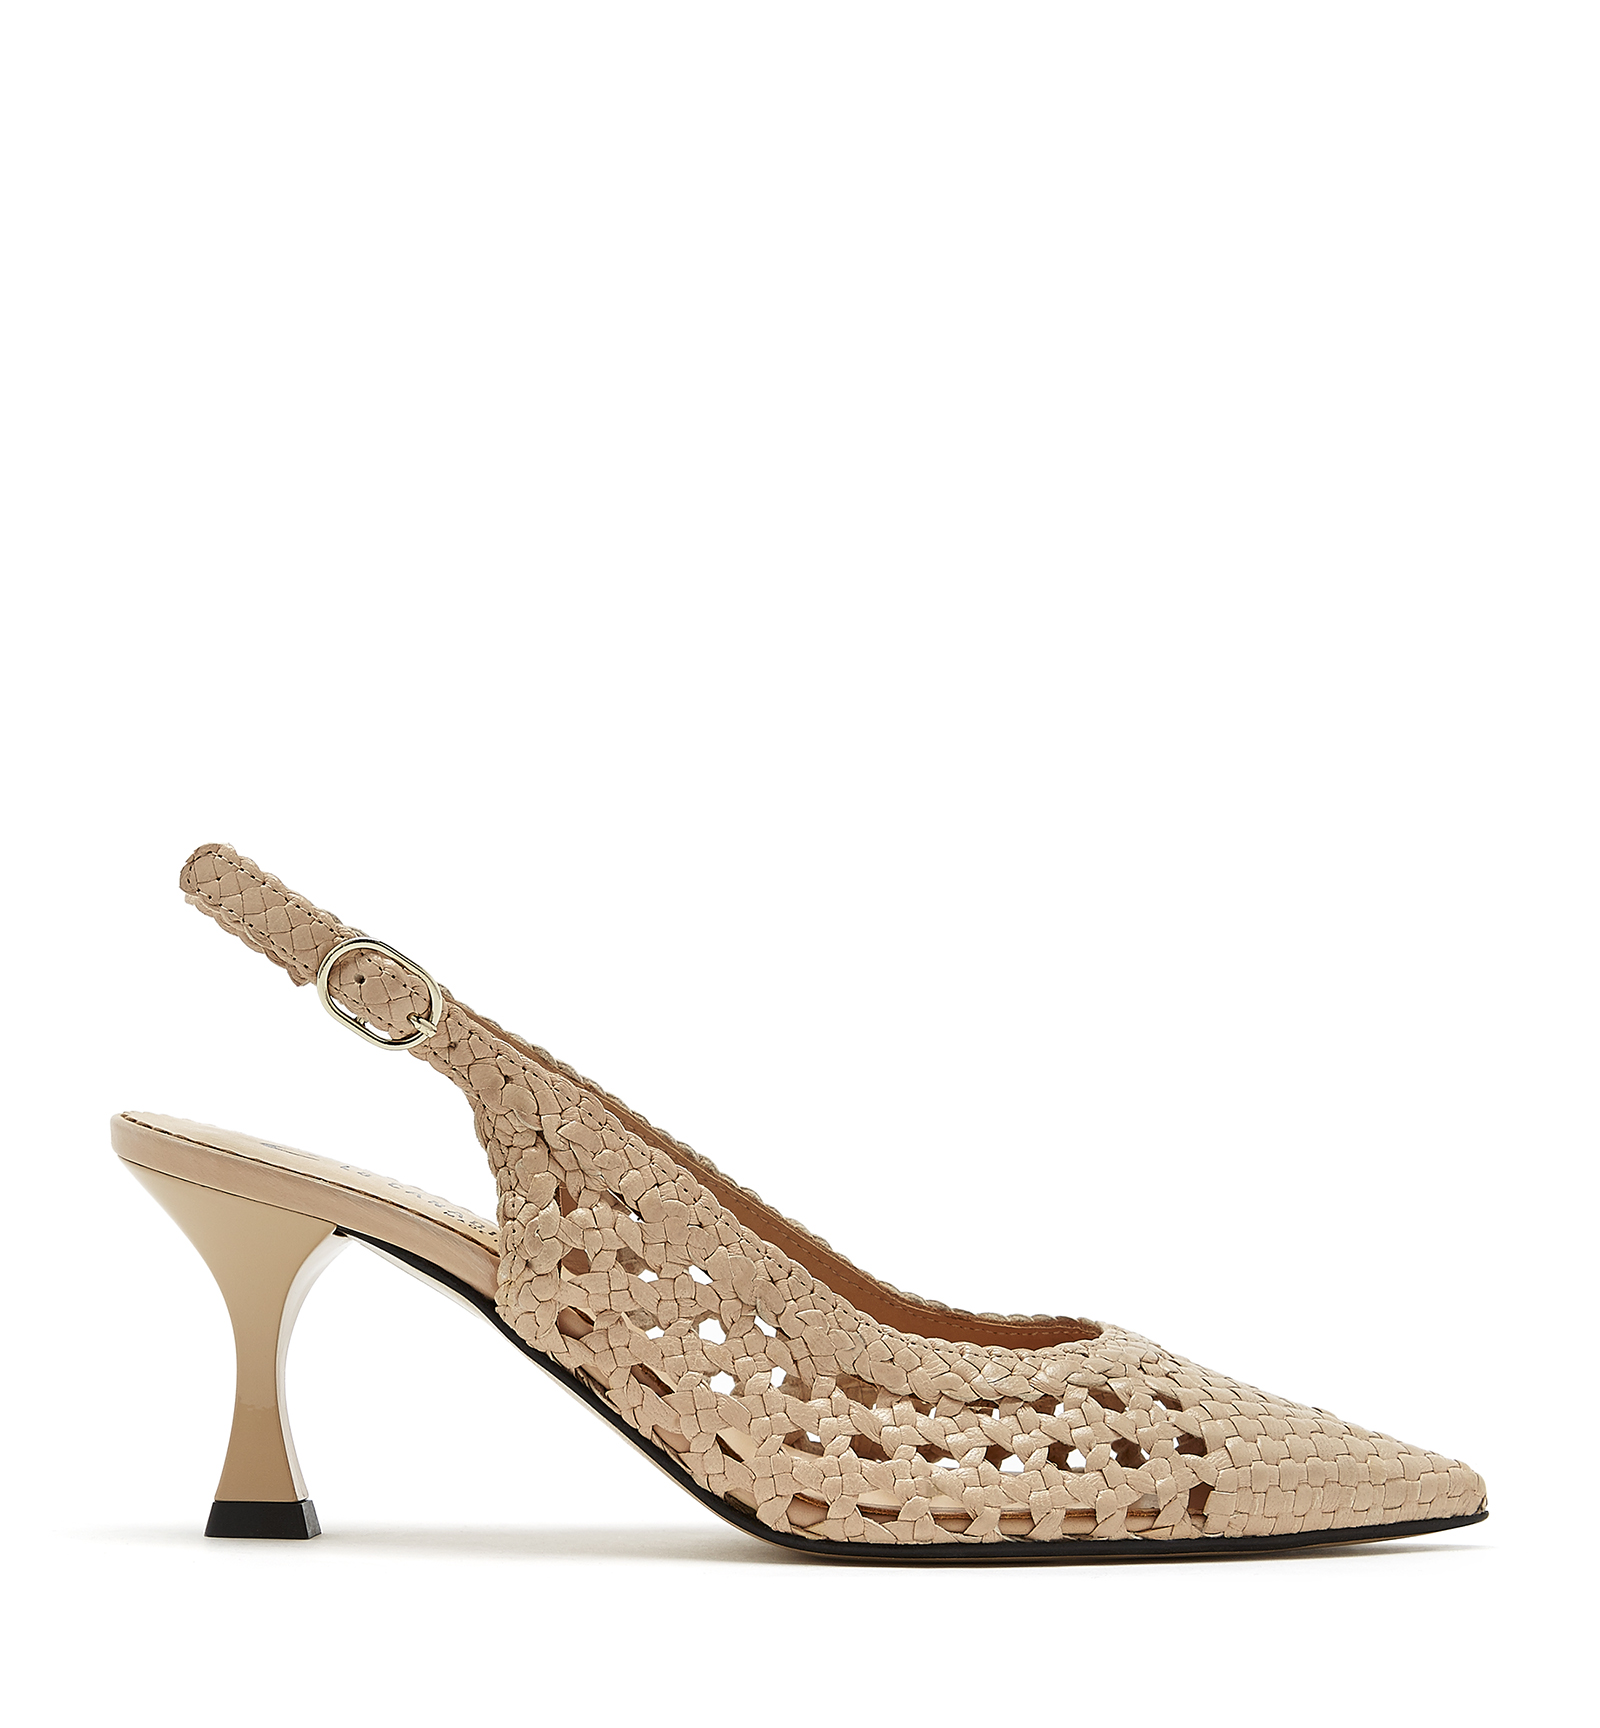 La Canadienne Perth Woven Leather Slingback Shoe In Sand